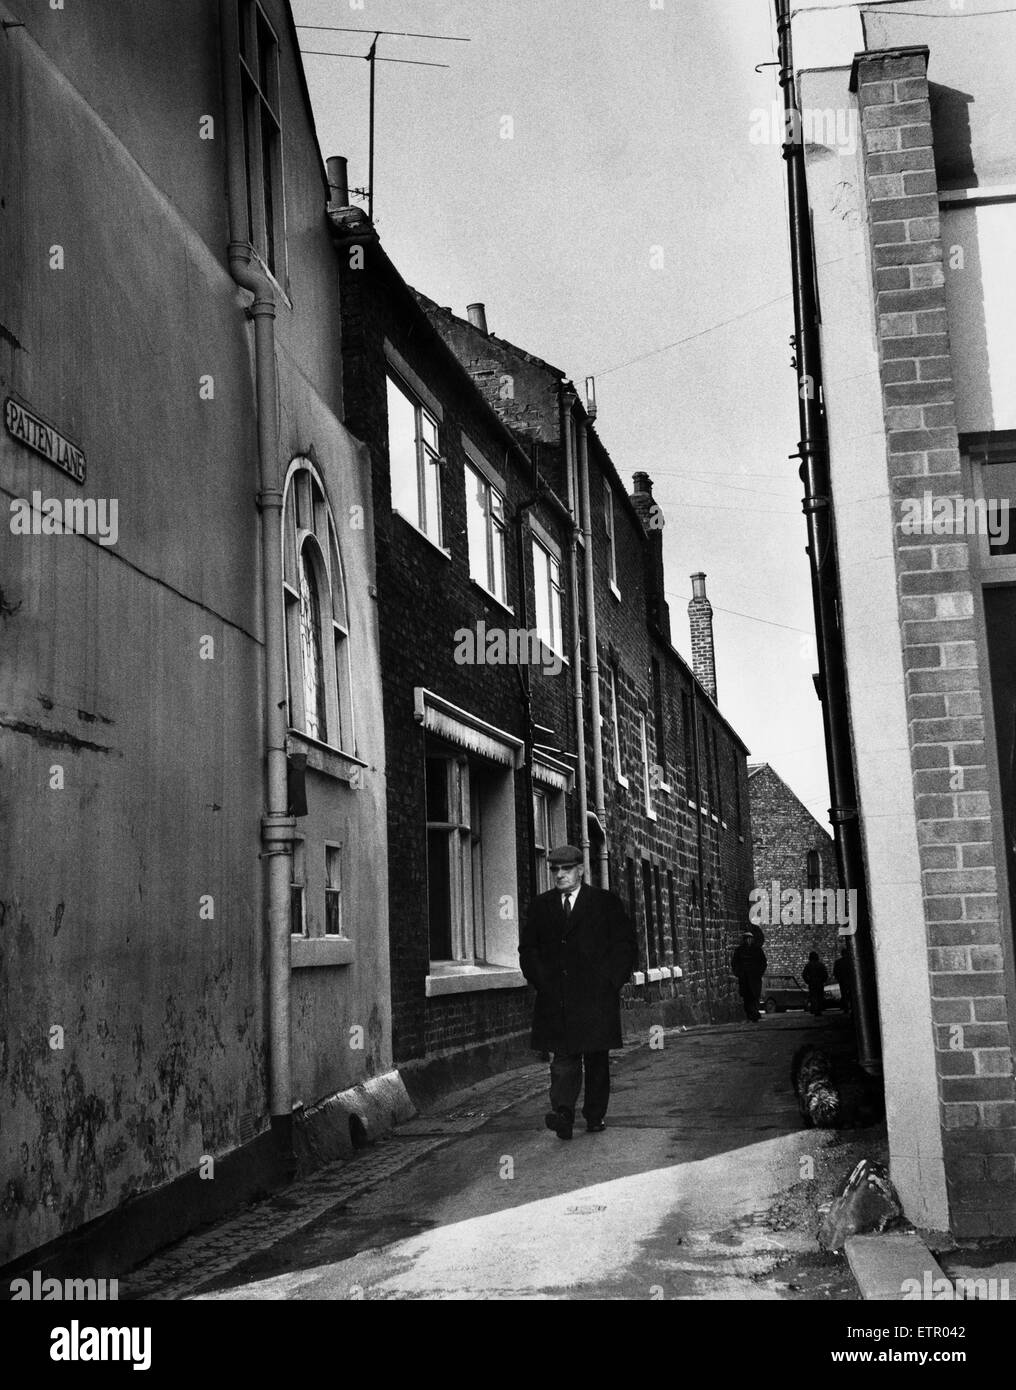 Patten Lane, a stones throw from the The Market Cross, will be demolished  as part of Guisborough Urban Council's scheme of housing development in the Northgate area, North Yorkshire. 20th January 1972. Stock Photo